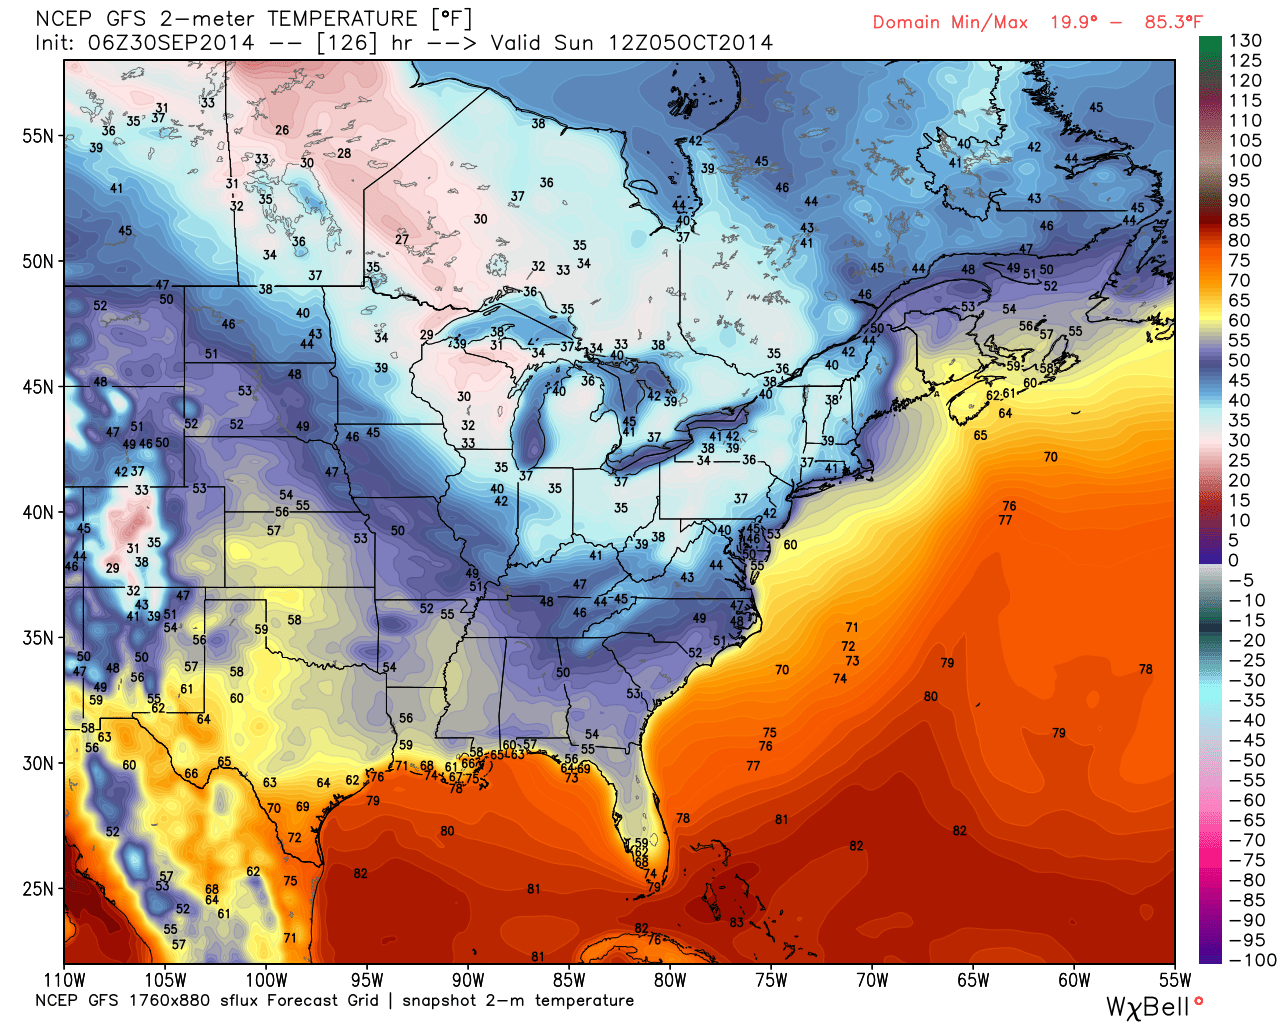 gfs temperatures showing cold air invasion detected